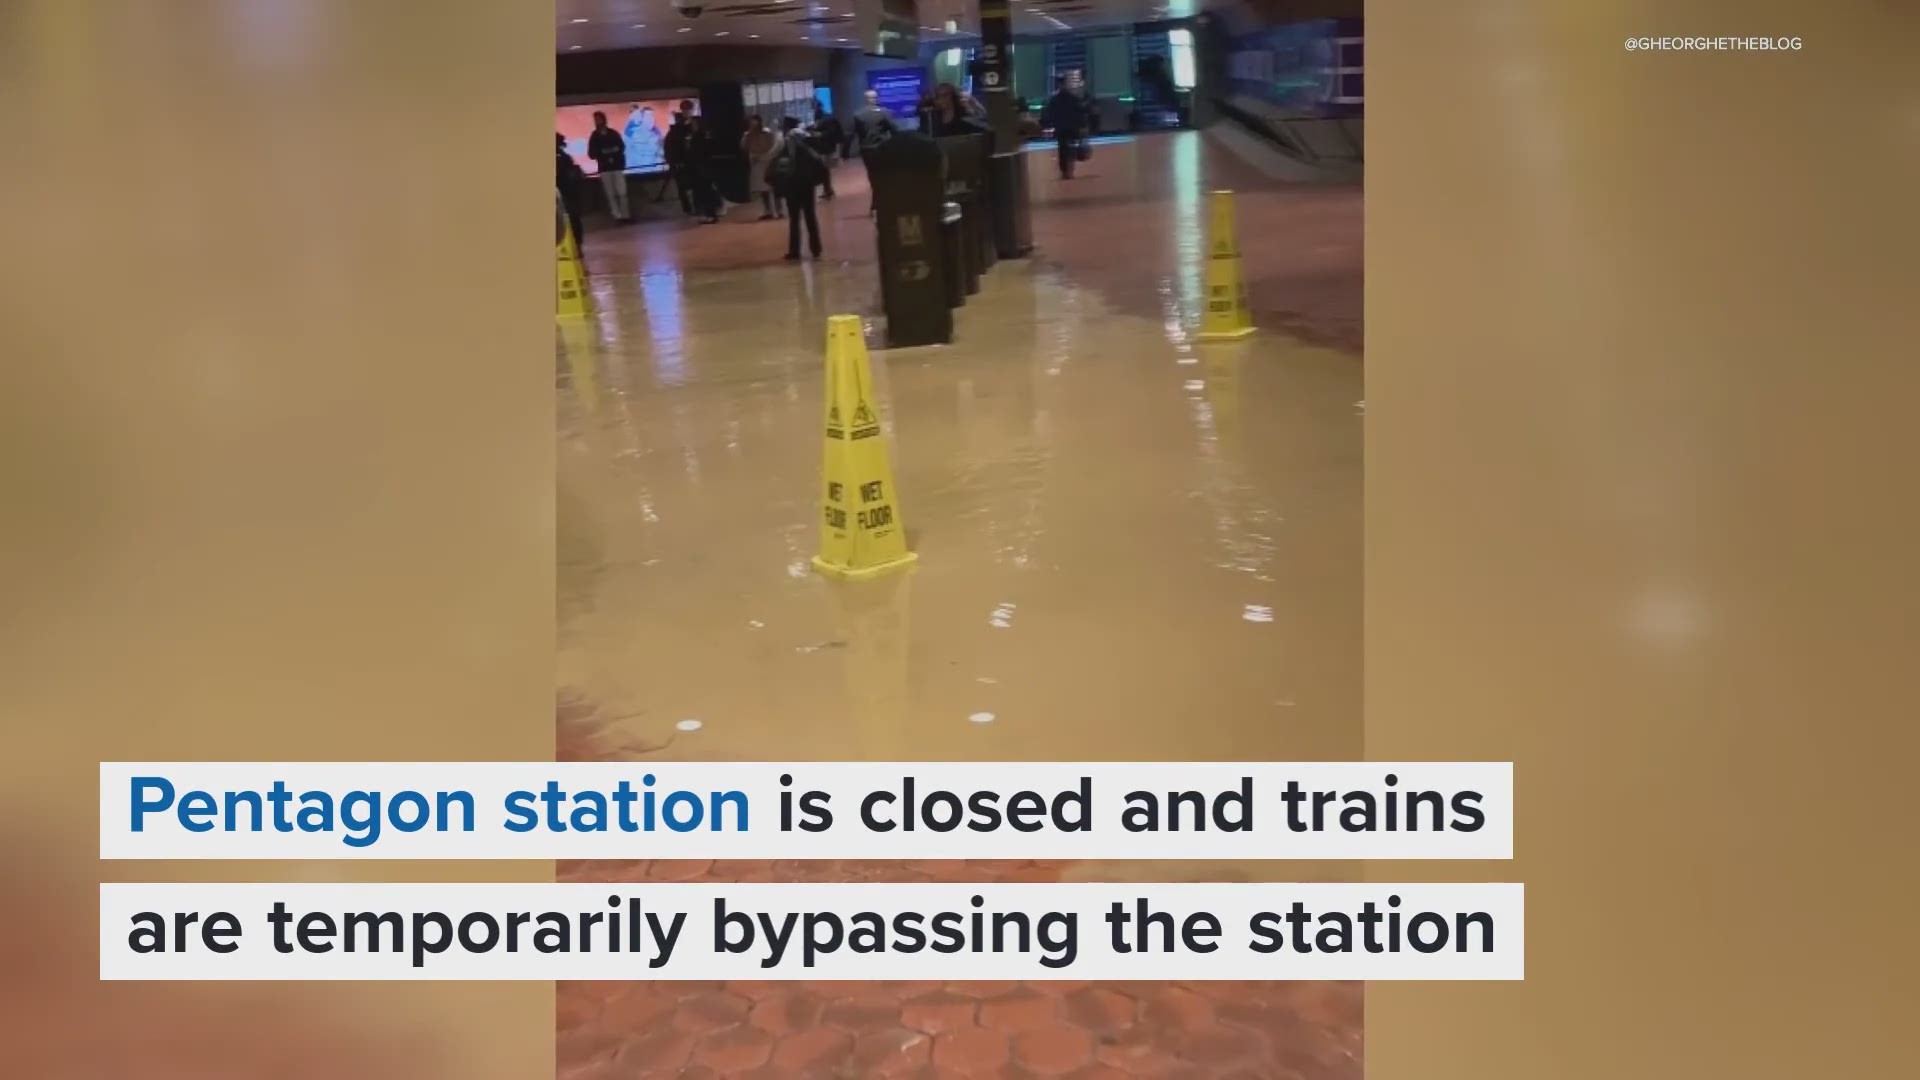 Metro officials have announced train delays due to reported flooding at Pentagon Station on Wednesday morning.